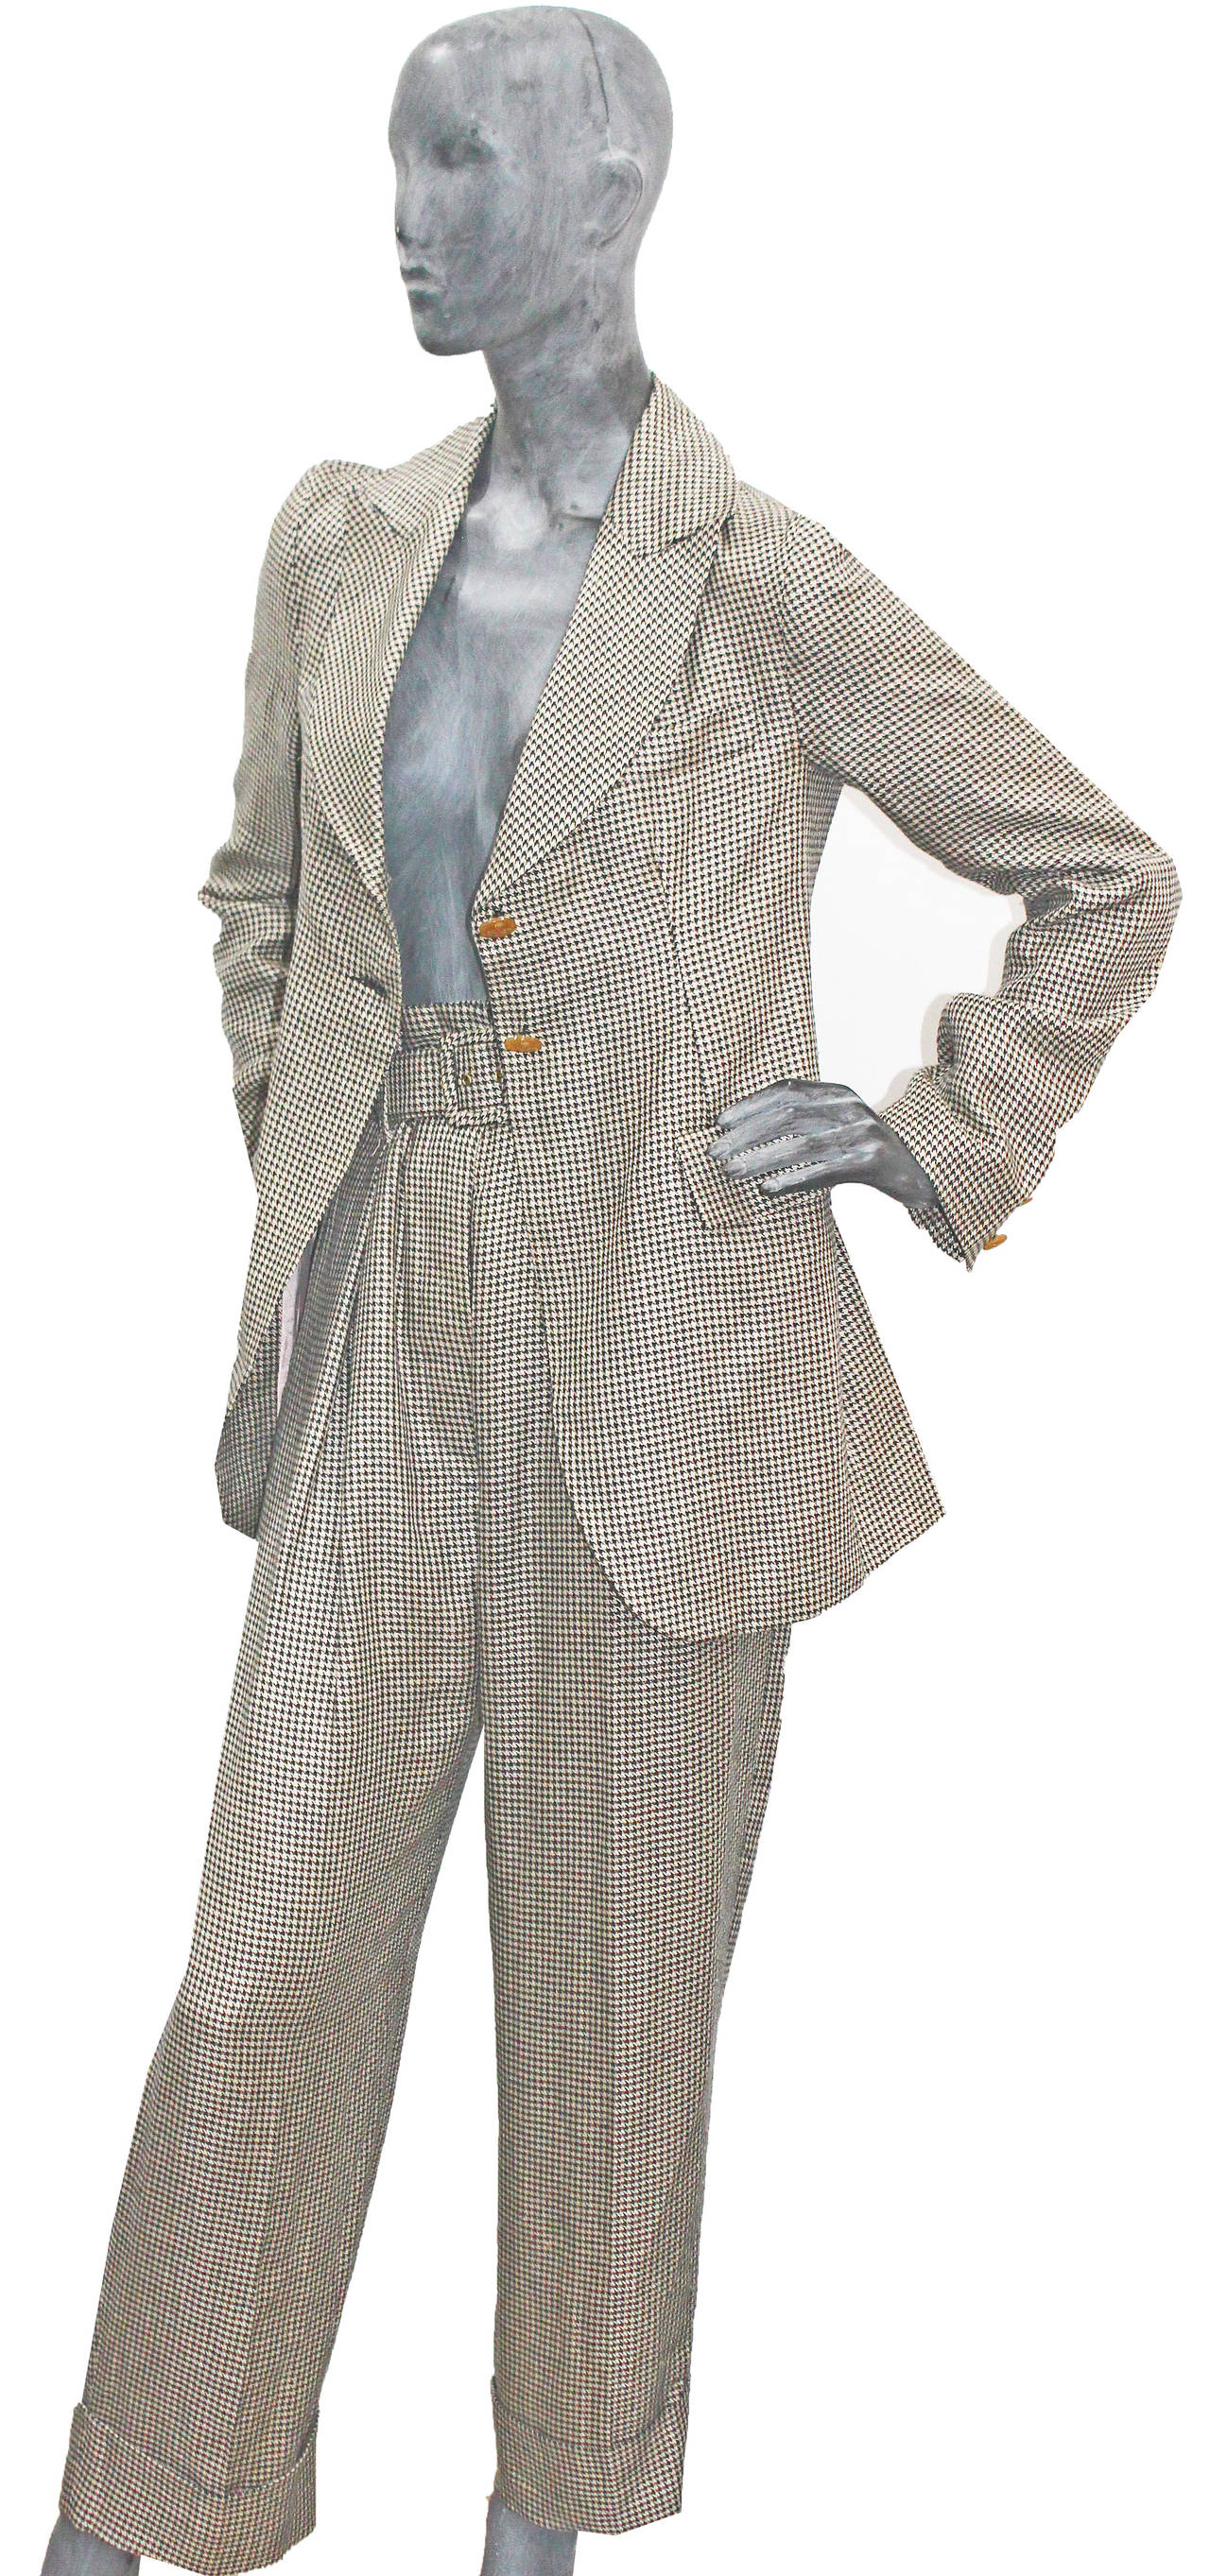 A Vivienne Westwood pant suit from the 1990s. The suit includes belted high waisted pants with a low crotch and a two button tailored blazer.

UK 12